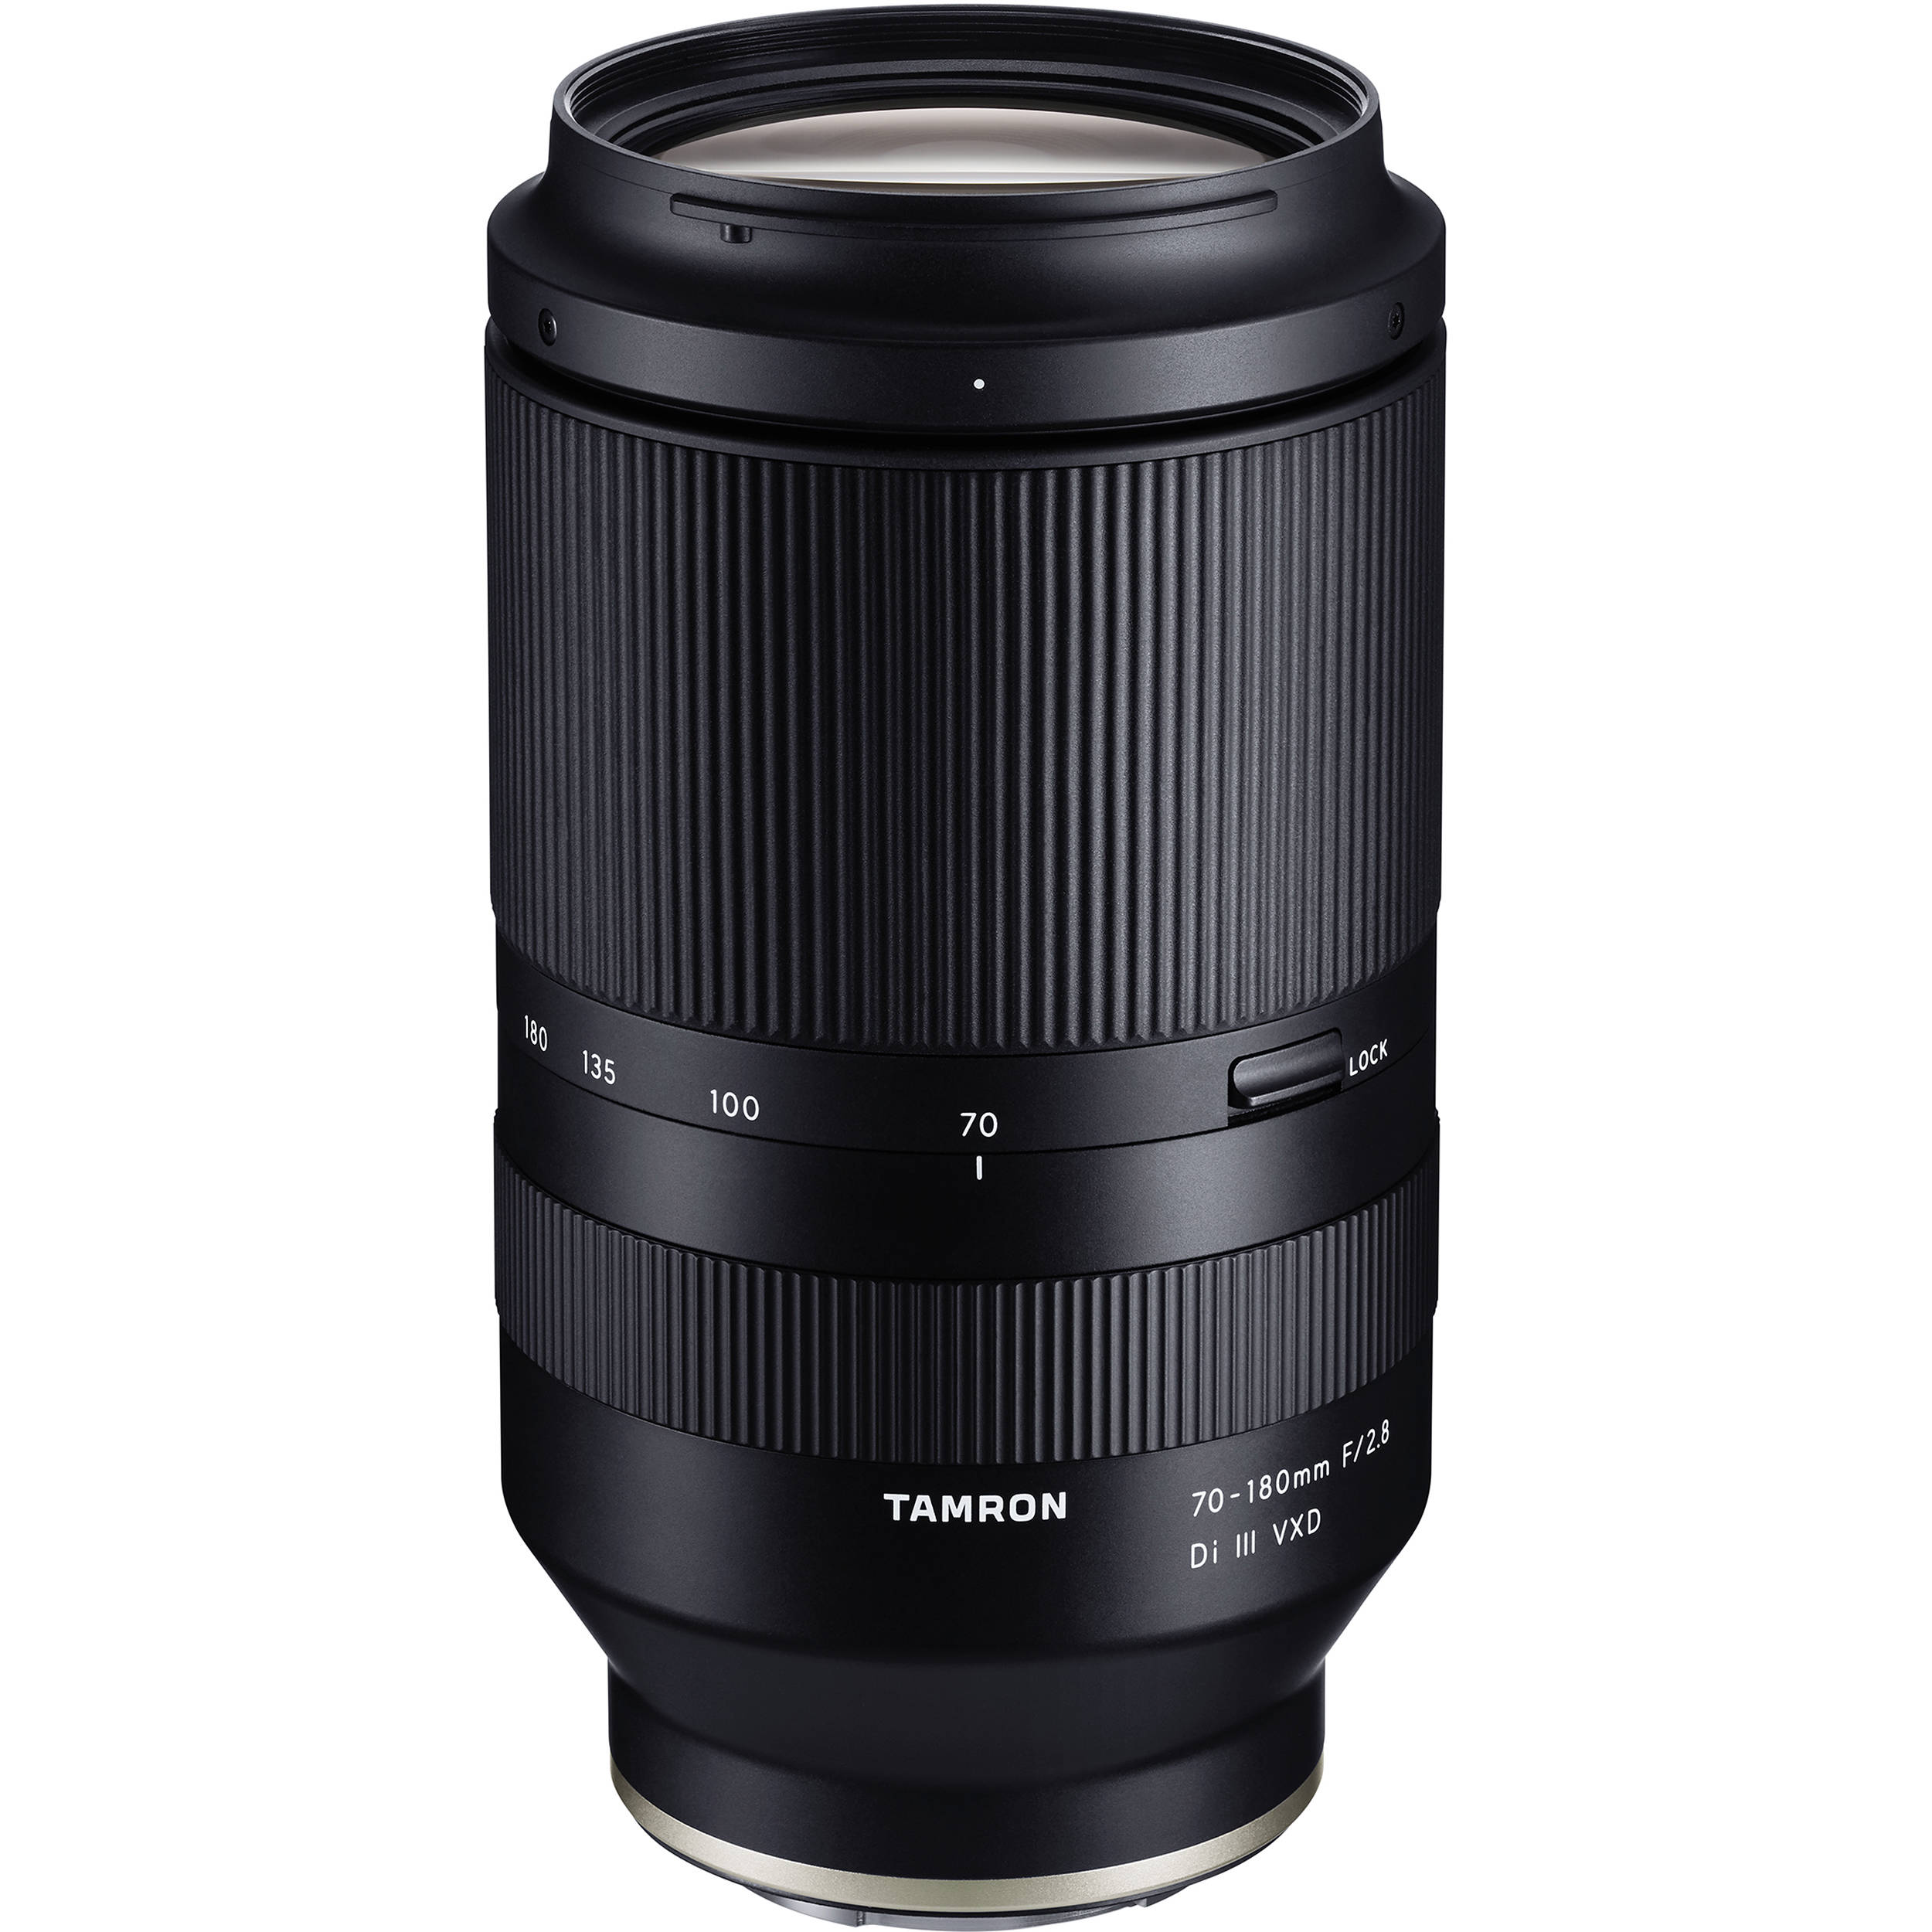 TThumbnail image for Tamron 70-180mm f/2.8 Di III VXD for Sony FE